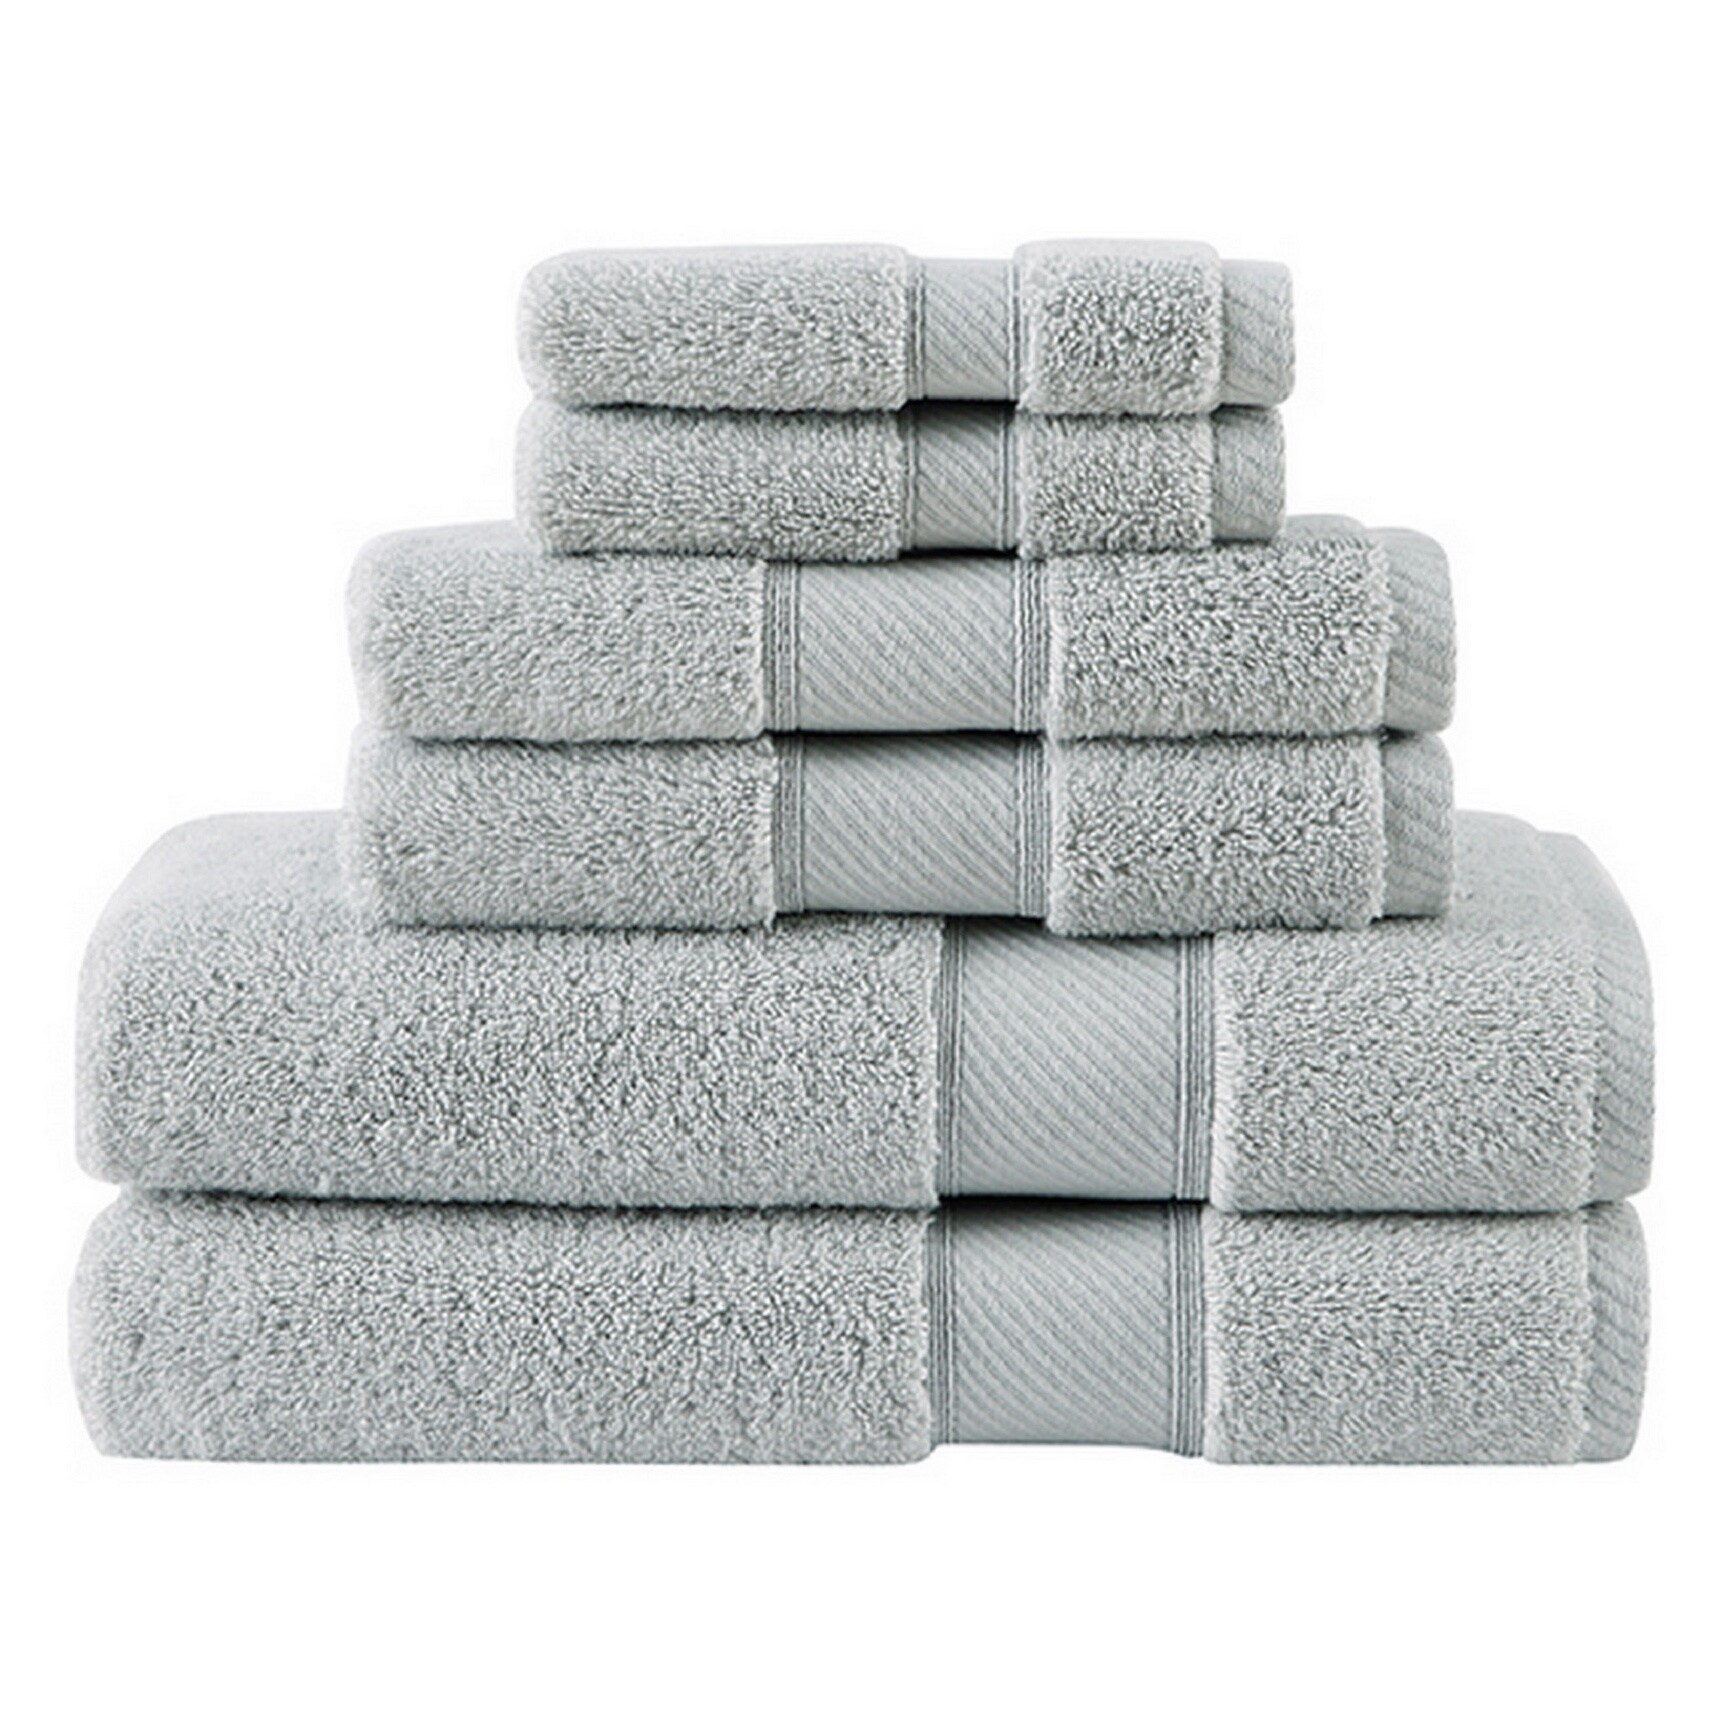 https://ak1.ostkcdn.com/images/products/17982488/Charisma-Classic-II-Towel-Collection-Bath-Hand-Wash-Towel-Sold-Seperately-e6fbcb79-8d99-485f-8620-4dfc2336765f.jpg